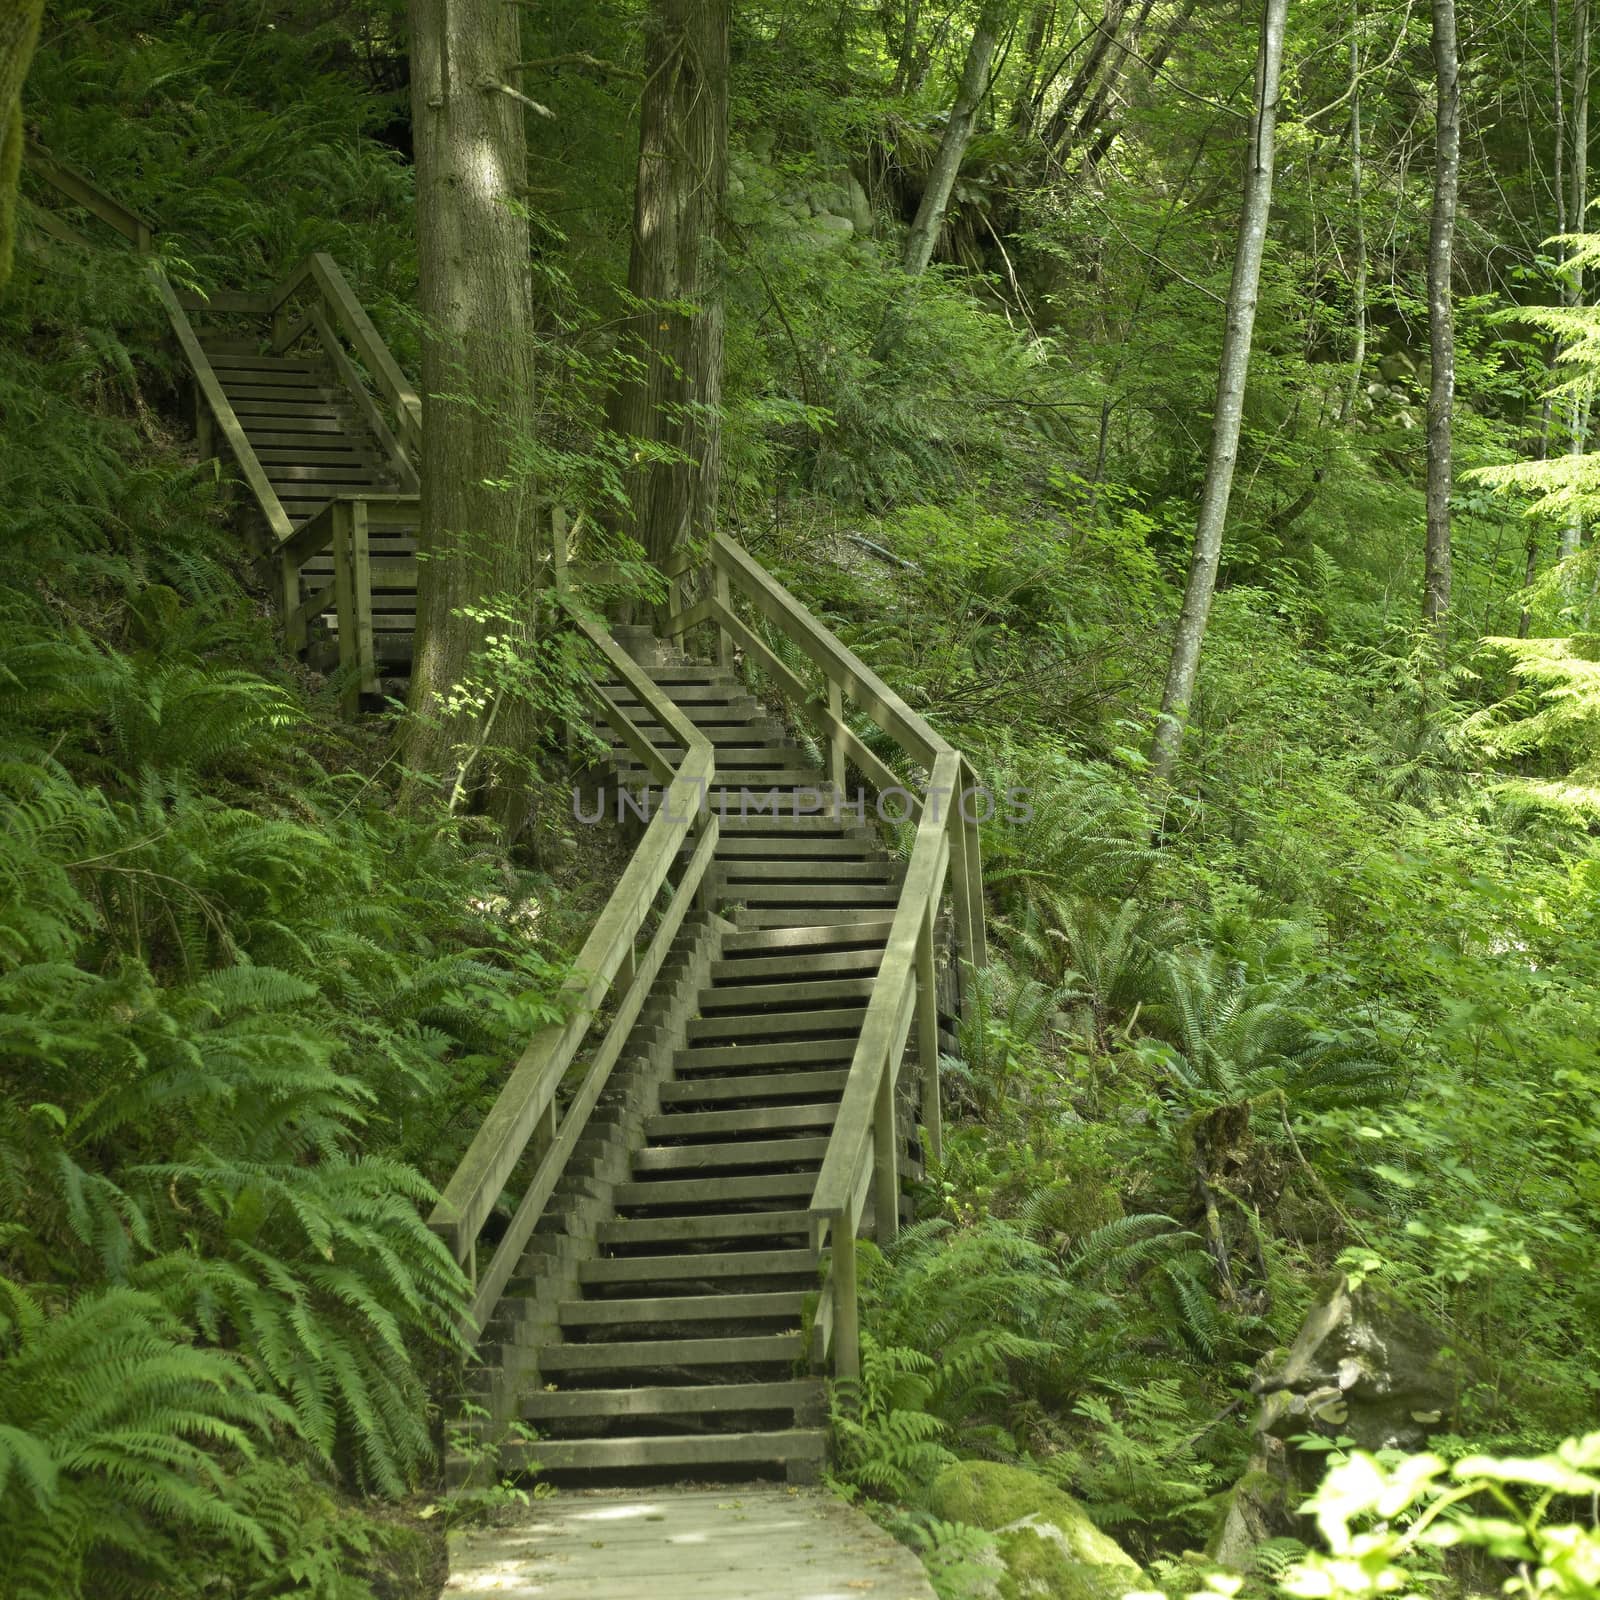 Large wooden stairs in the green forest